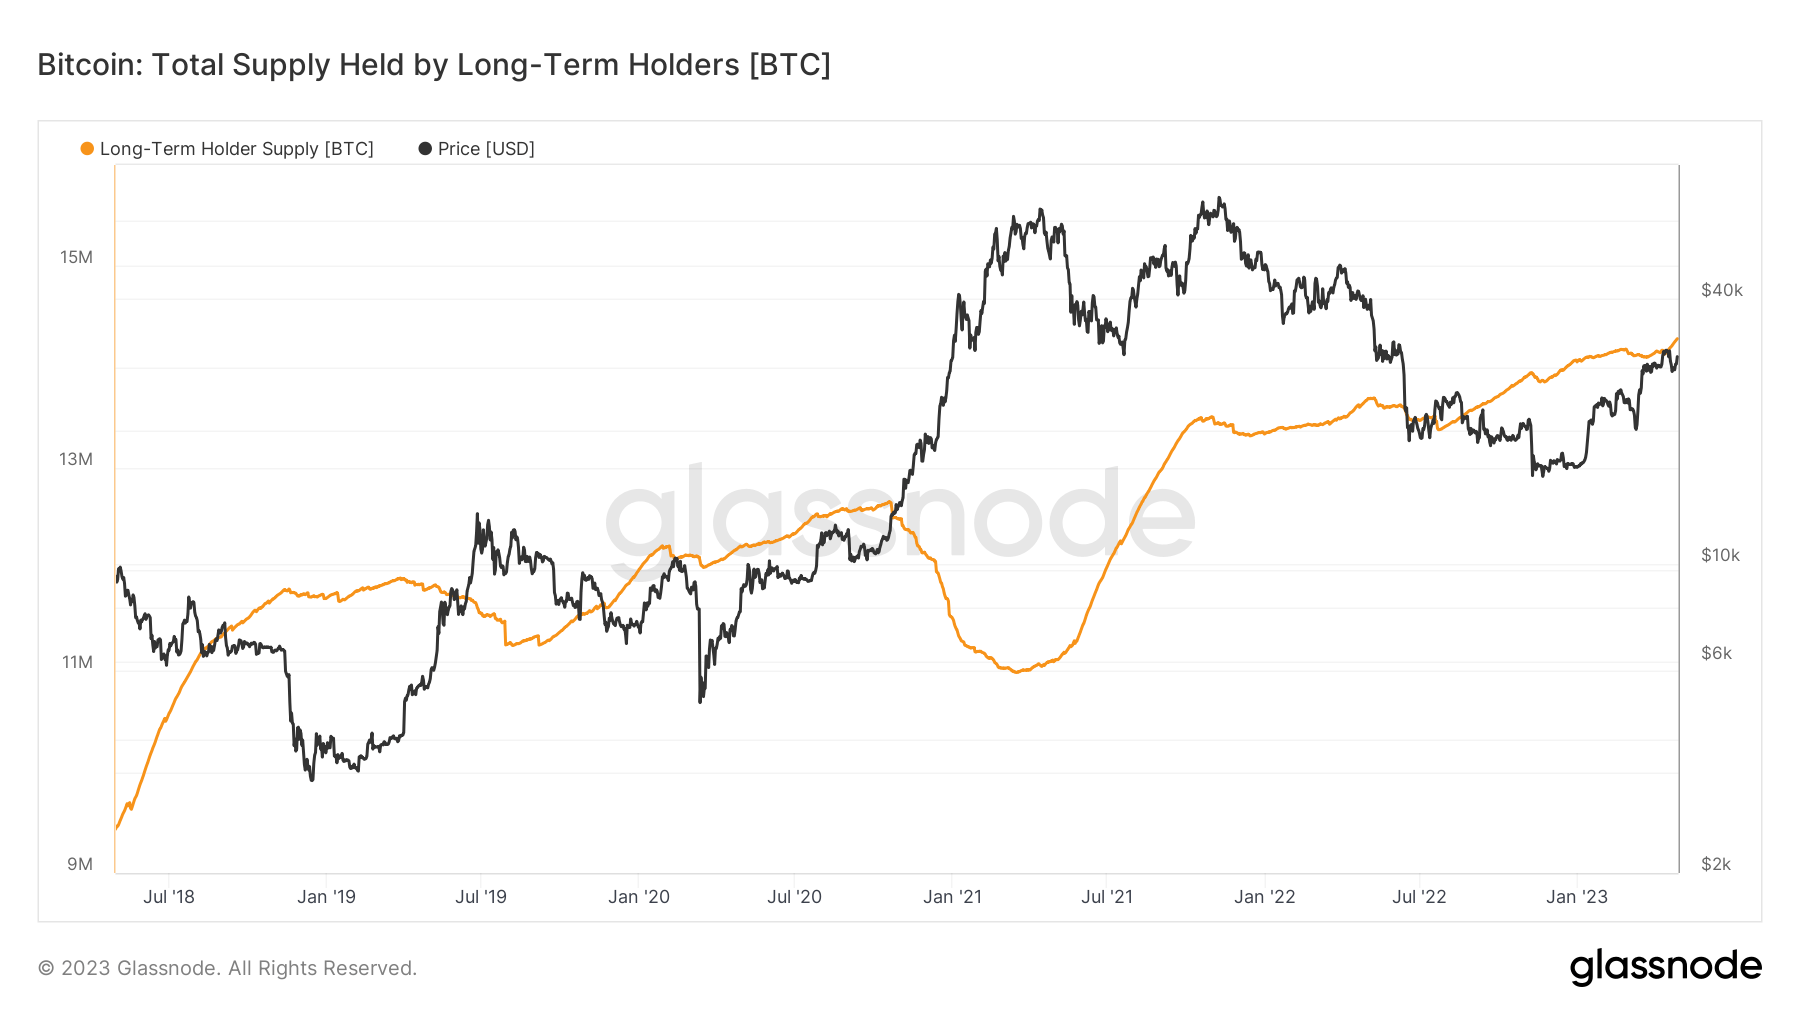 Long-term holders hit all-time high – roughly 5 months after FTX collapse